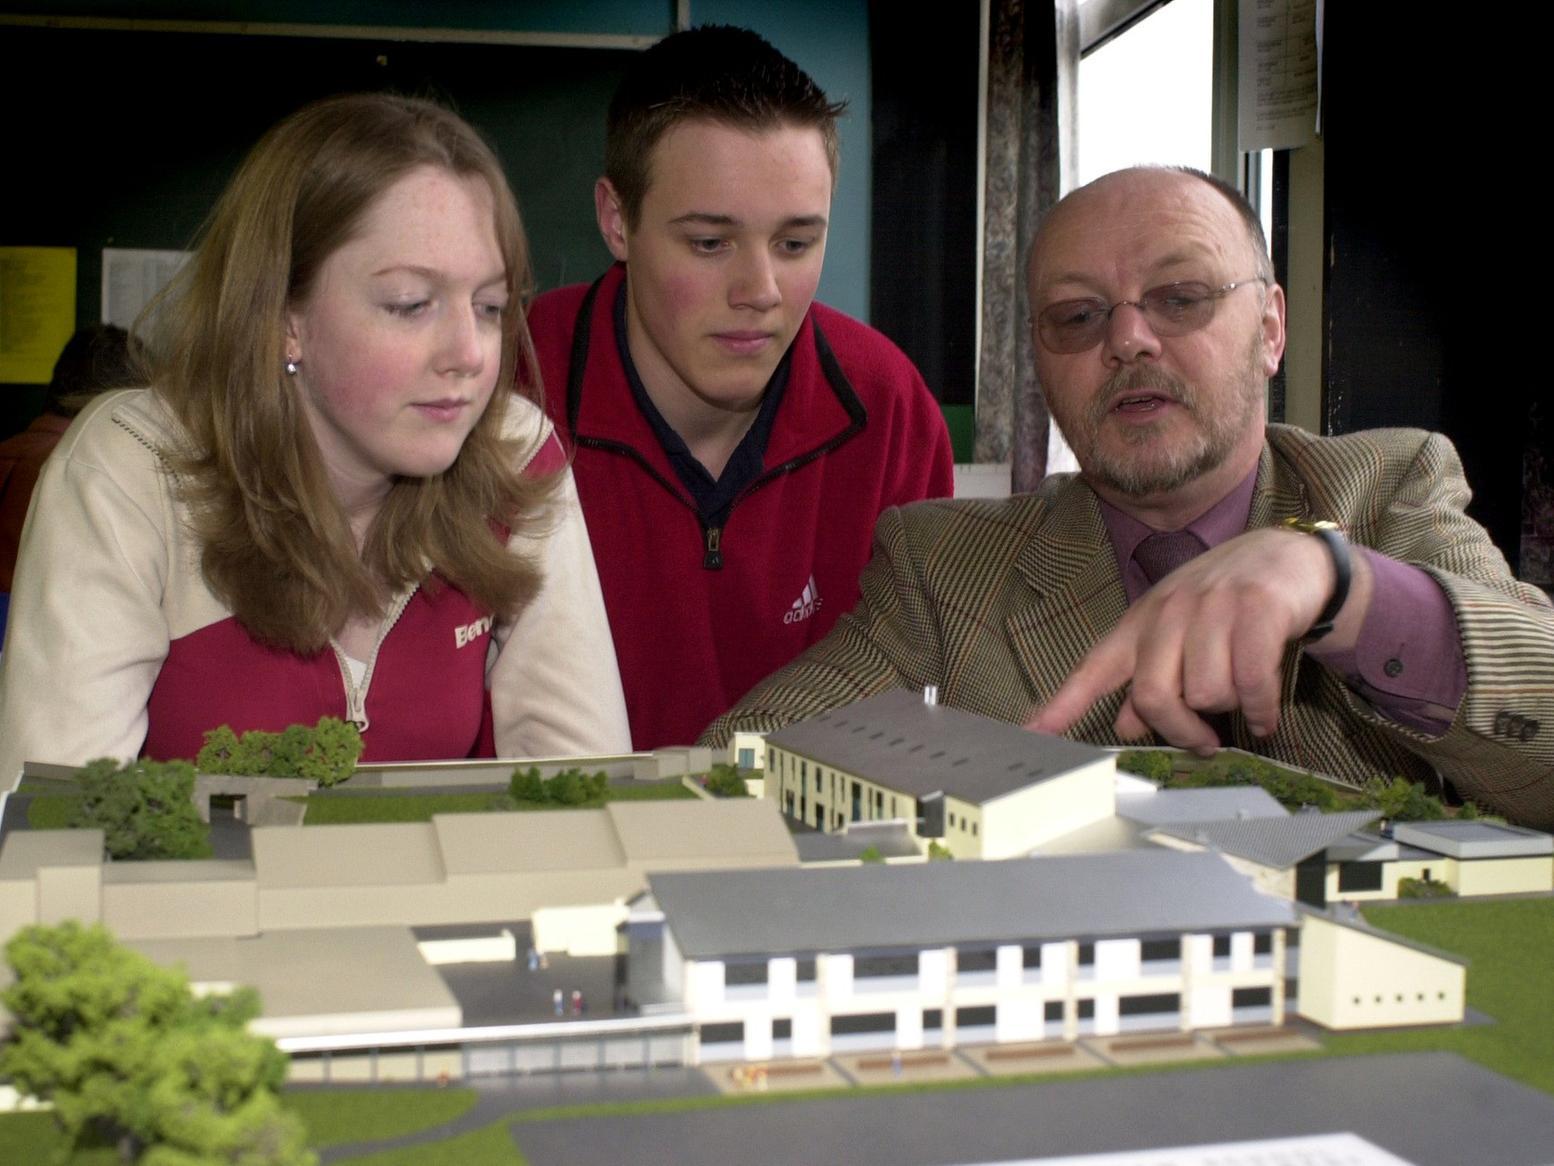 Fire-hit Crawshaw School in Pudsey was set to rise from the ashes. Deputy head Patrick Lee shows sixth form students Laura Wetherill and James Adams a model of the new building to be constructed.